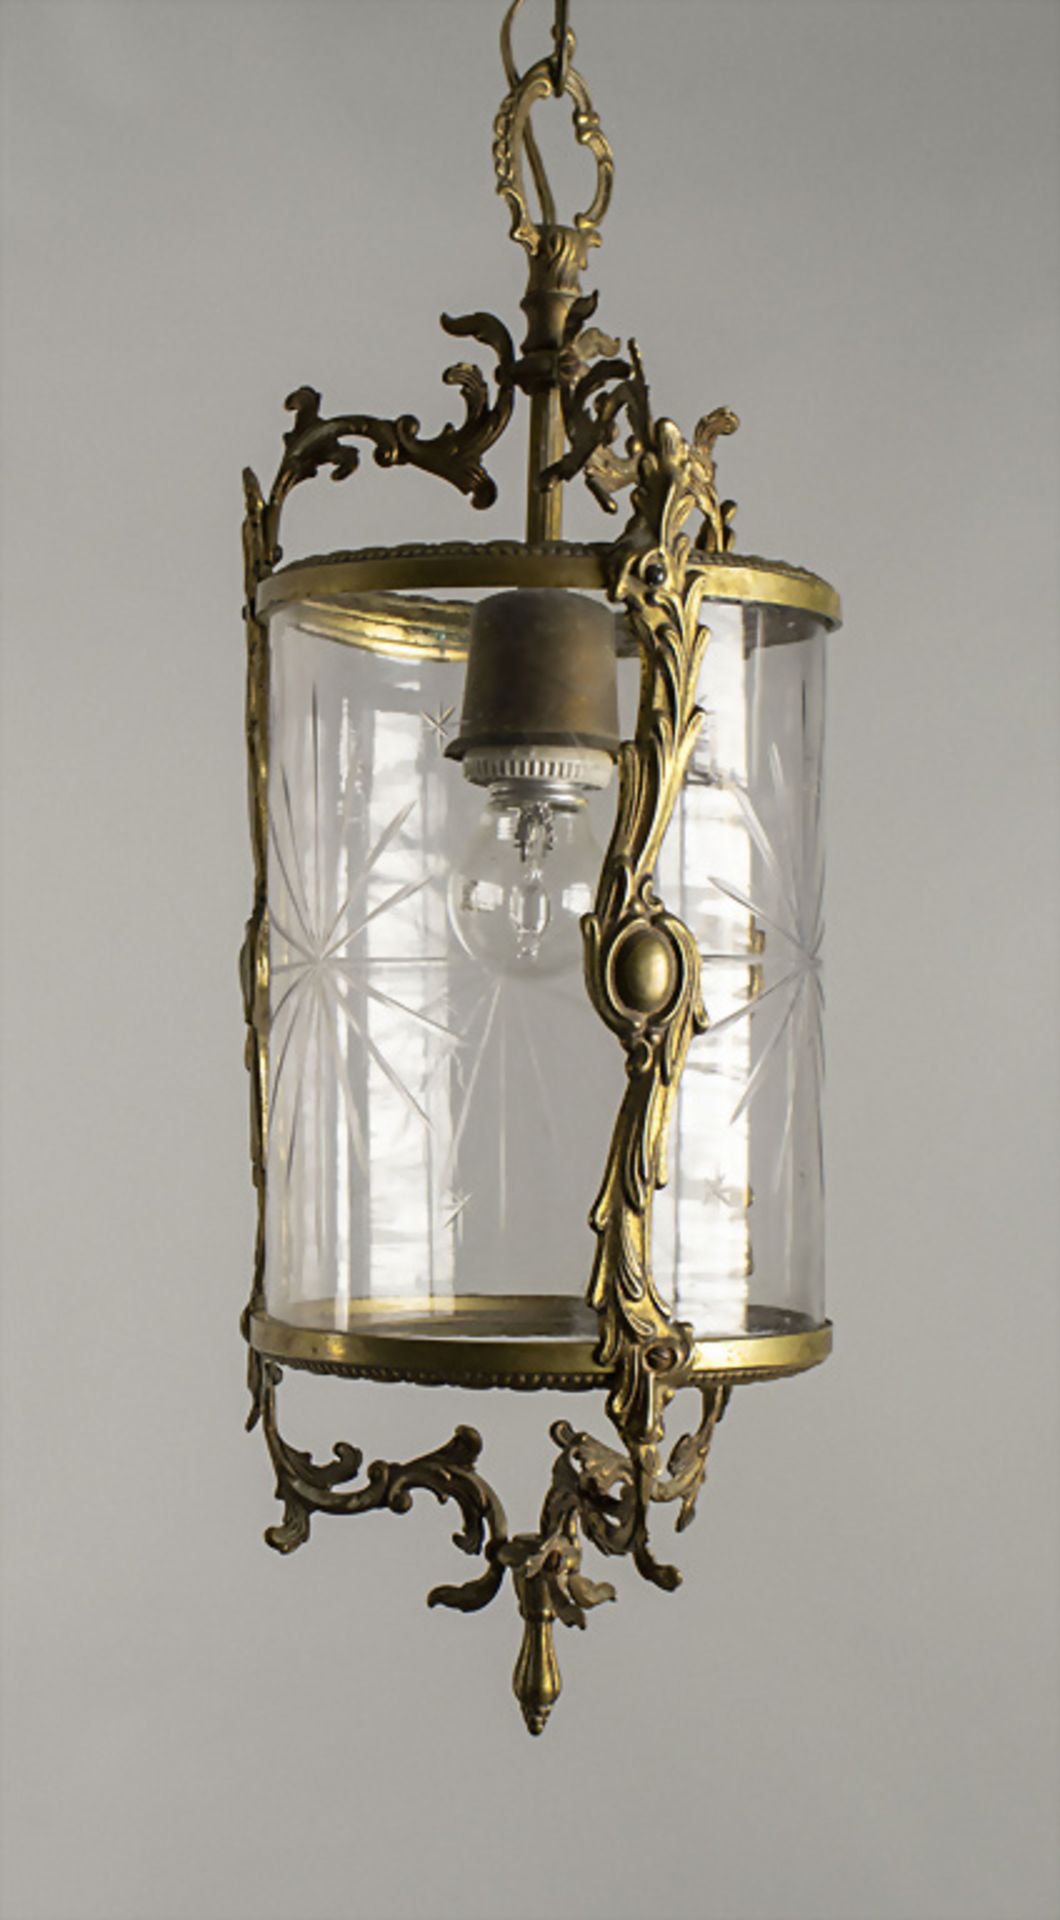 Flurlampe / A hallway ceiling lamp, Frankreich, Anfang 20. Jh. - Image 2 of 5